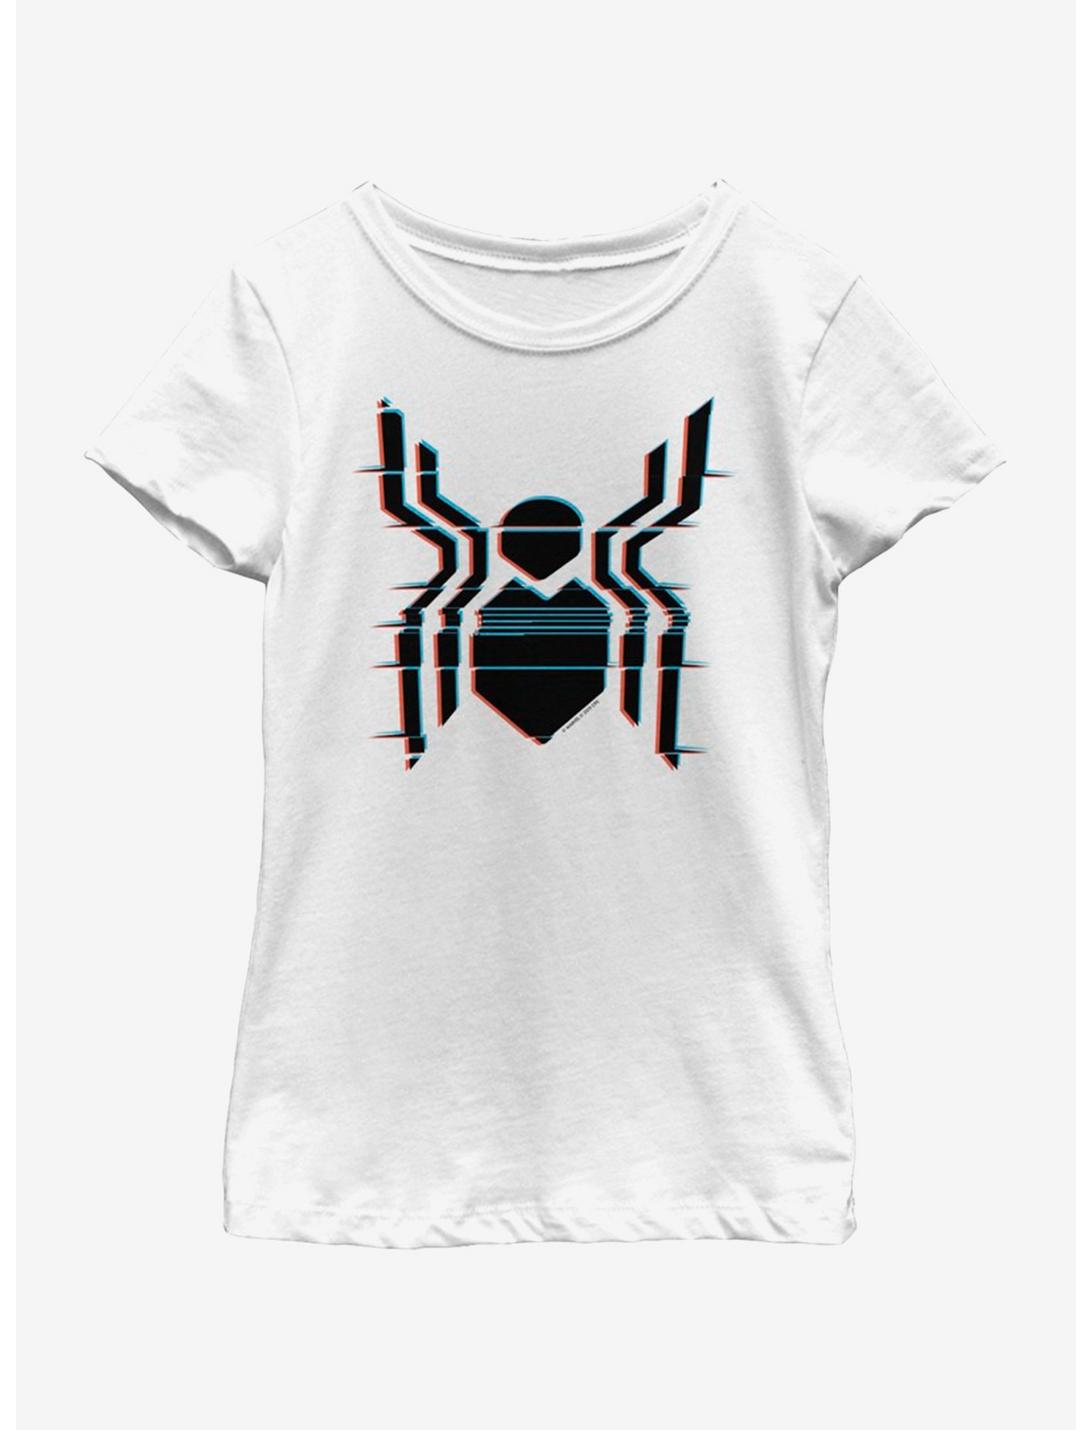 Marvel Spiderman: Far From Home Glitch Spider Logo Youth Girls T-Shirt, WHITE, hi-res